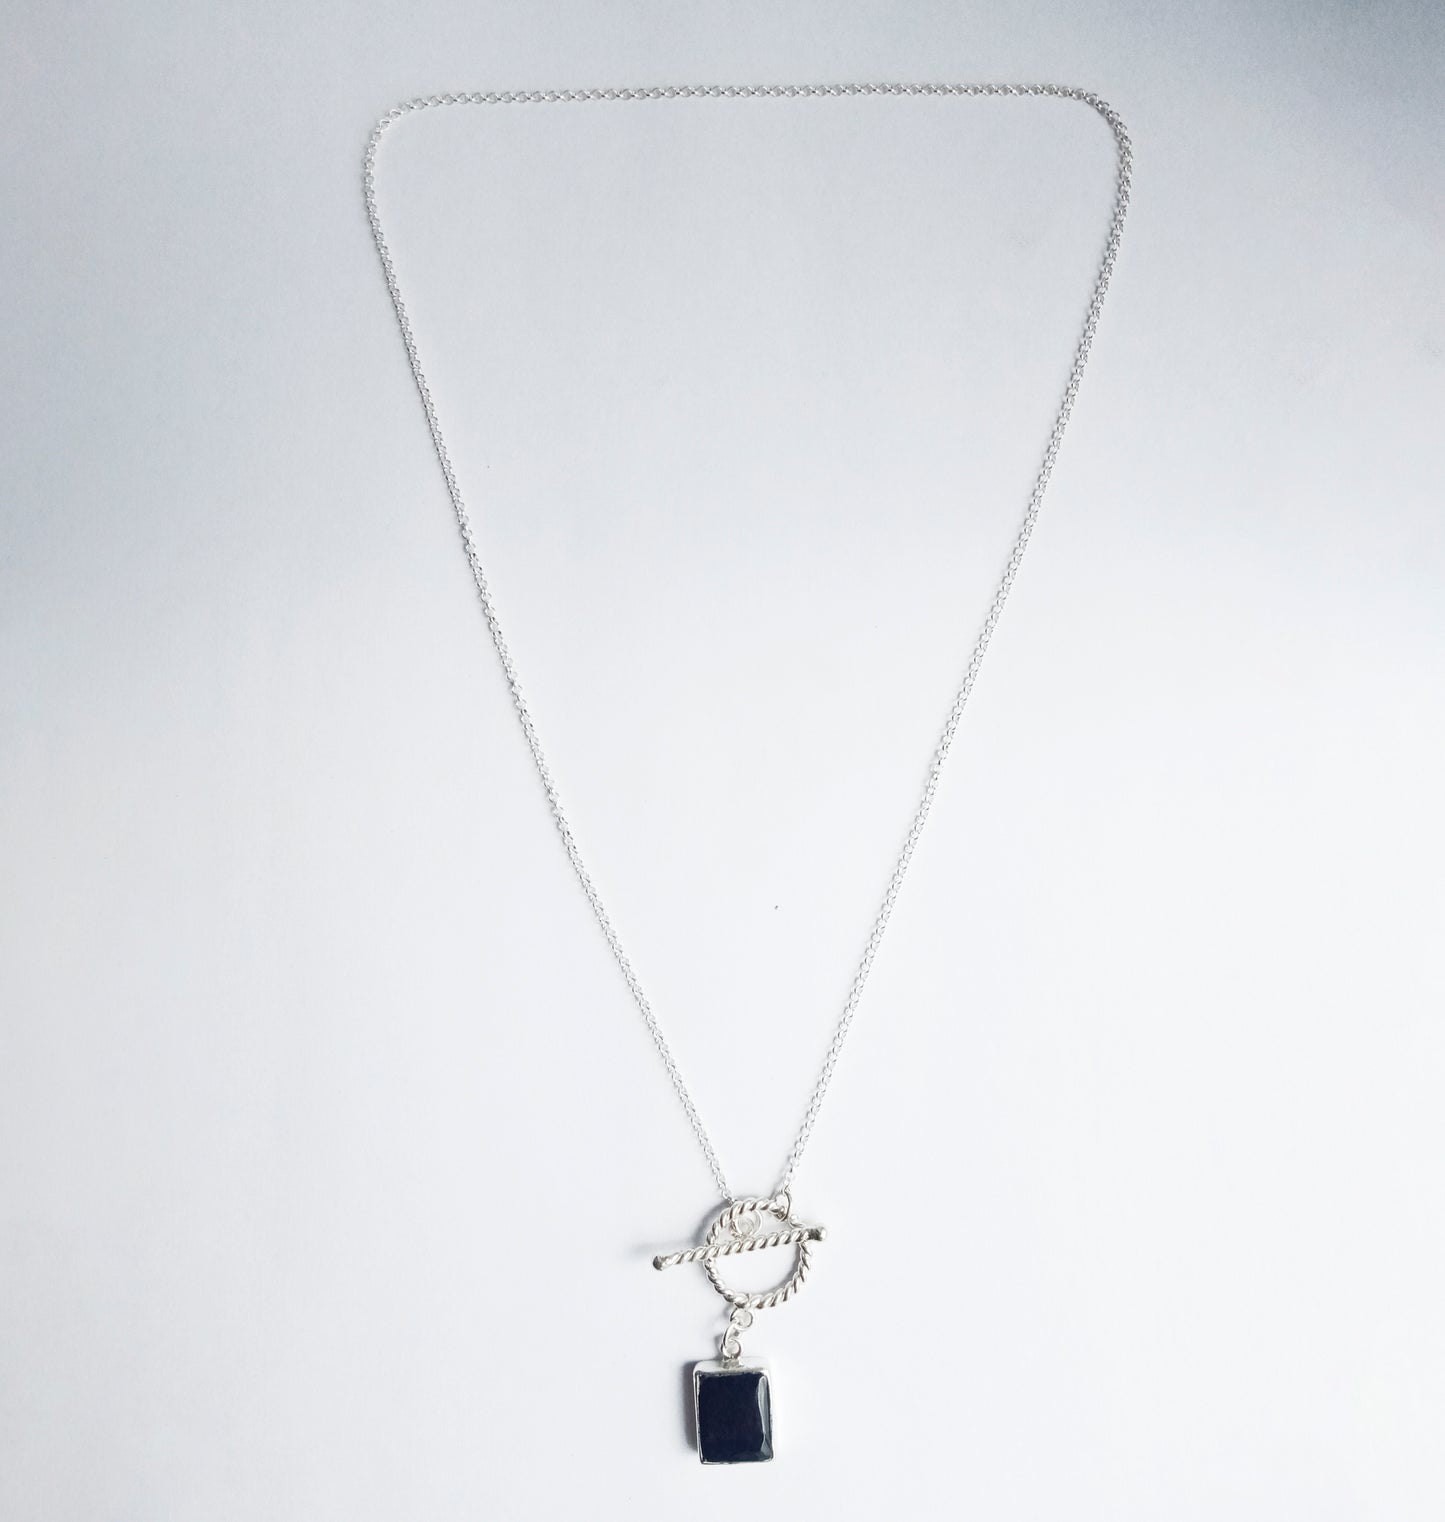 Black Onyx Silver 925 Toggle Necklace